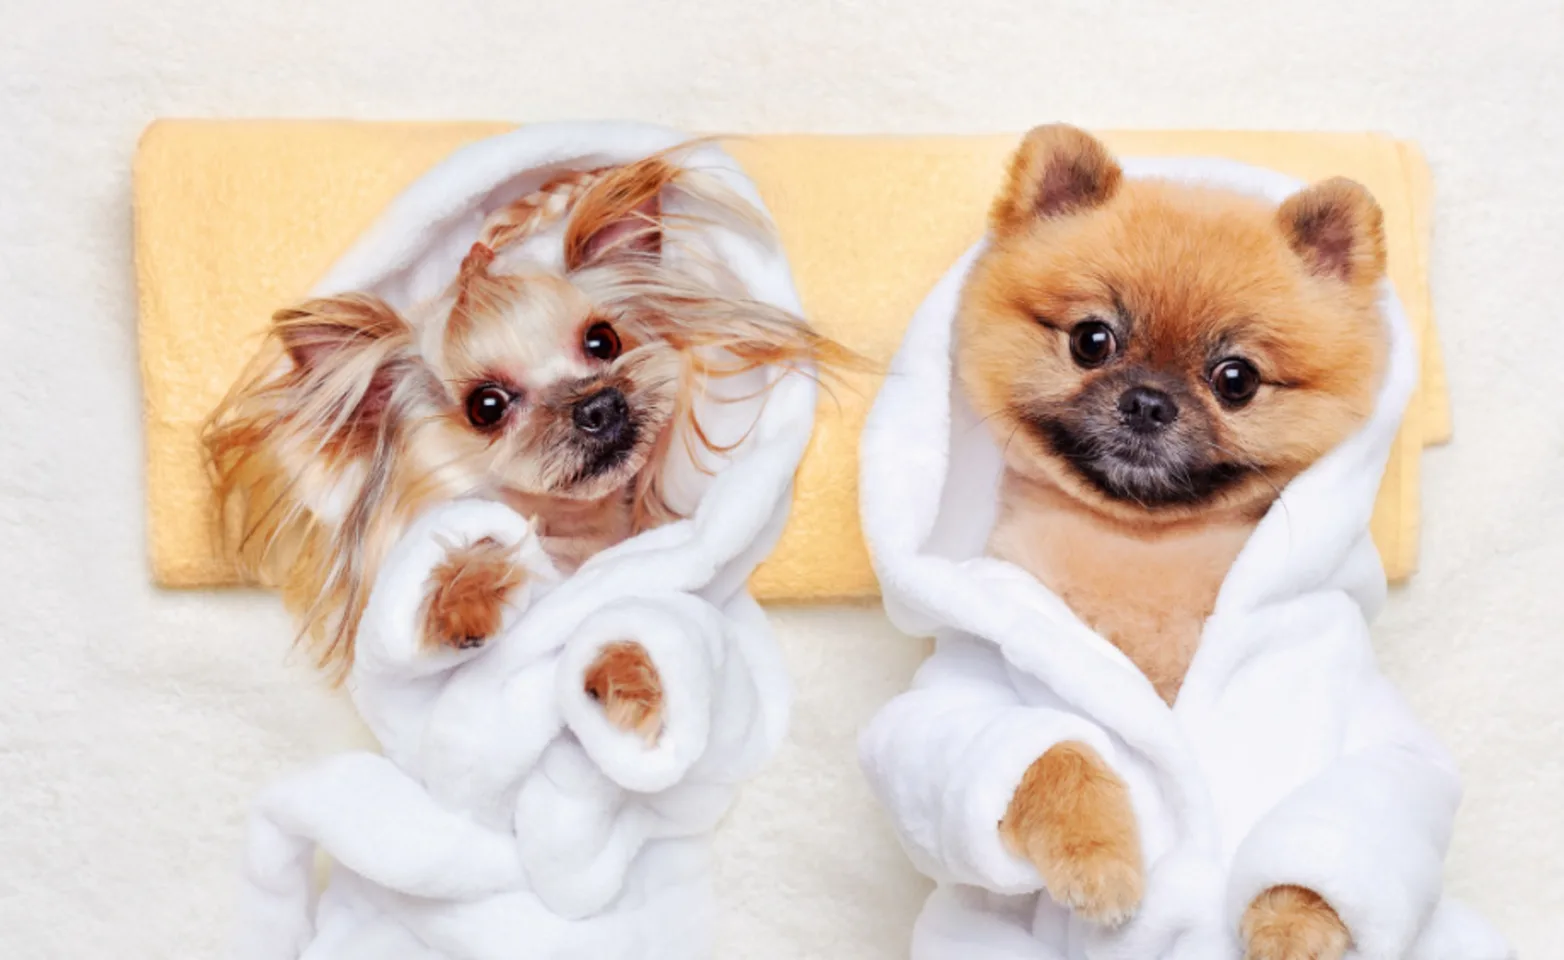 Two Dogs Wearing Bathrobes Lying on a Towel